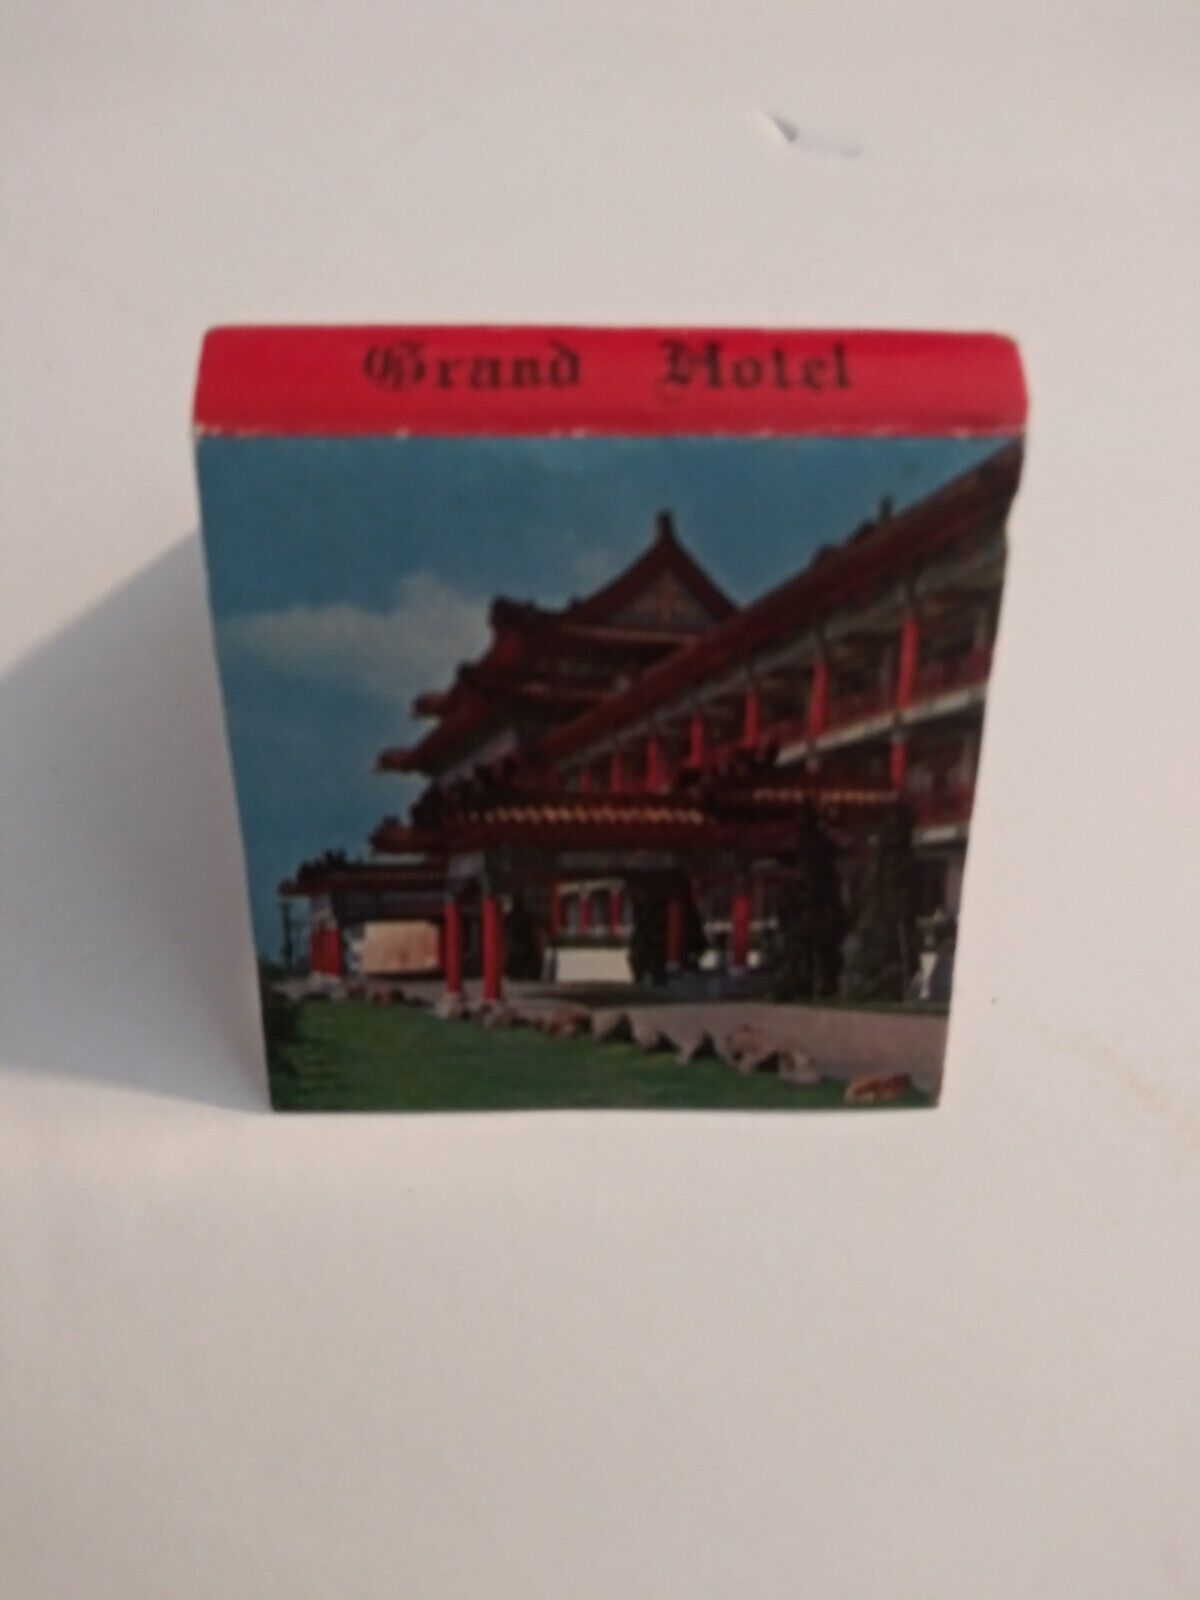 Vintage Matchbook Cover From Grand Hotel Taipei Taiwan No Matches